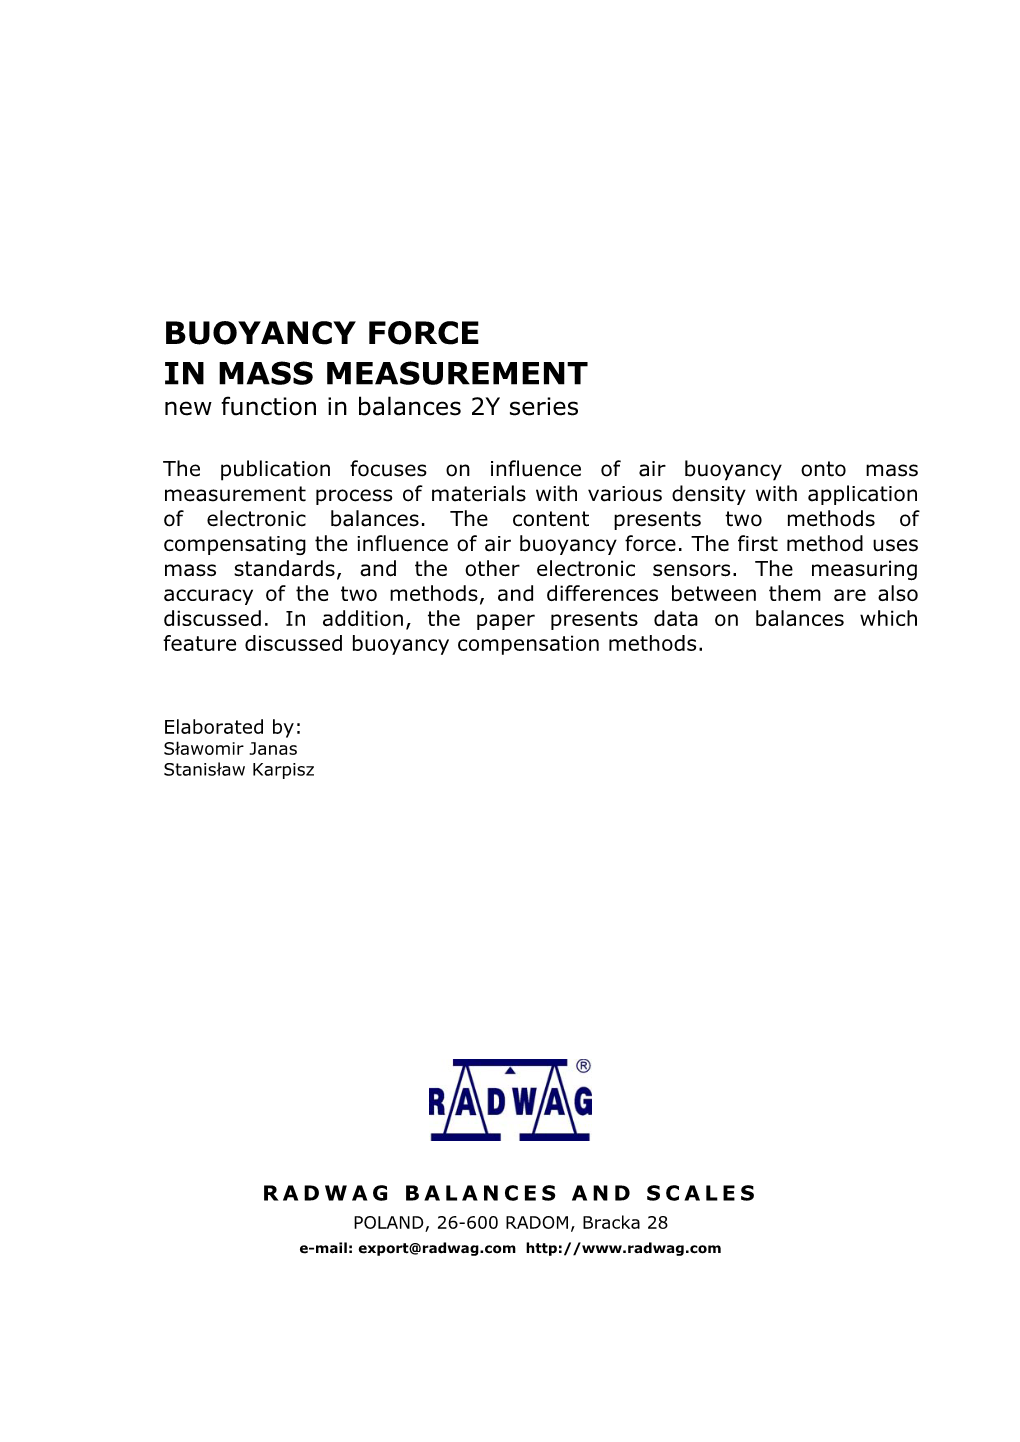 BUOYANCY FORCE in MASS MEASUREMENT New Function in Balances 2Y Series